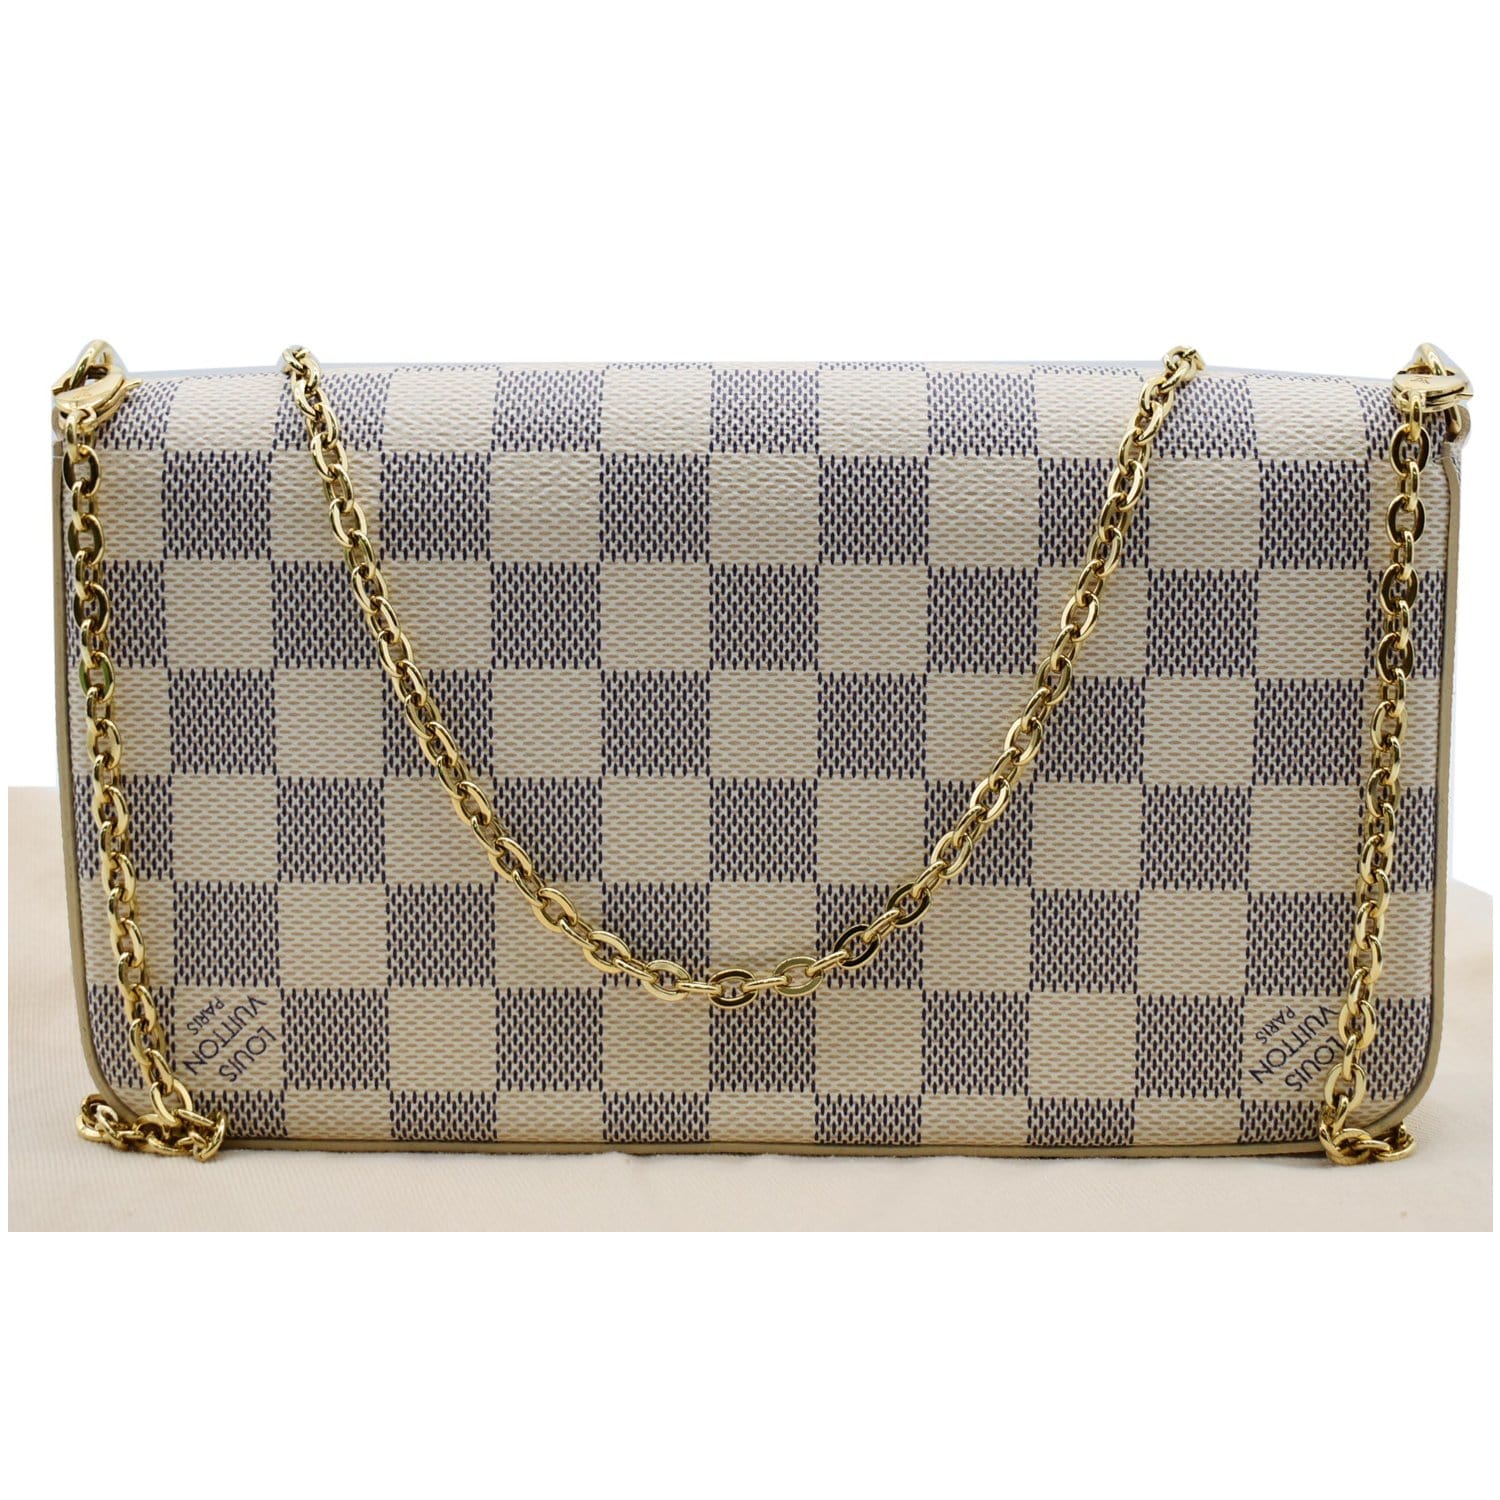 used Unisex Pre-owned Authenticated Louis Vuitton Damier Azur Pochette Felicie Canvas White Crossbody Bag, Adult Unisex, Size: Small